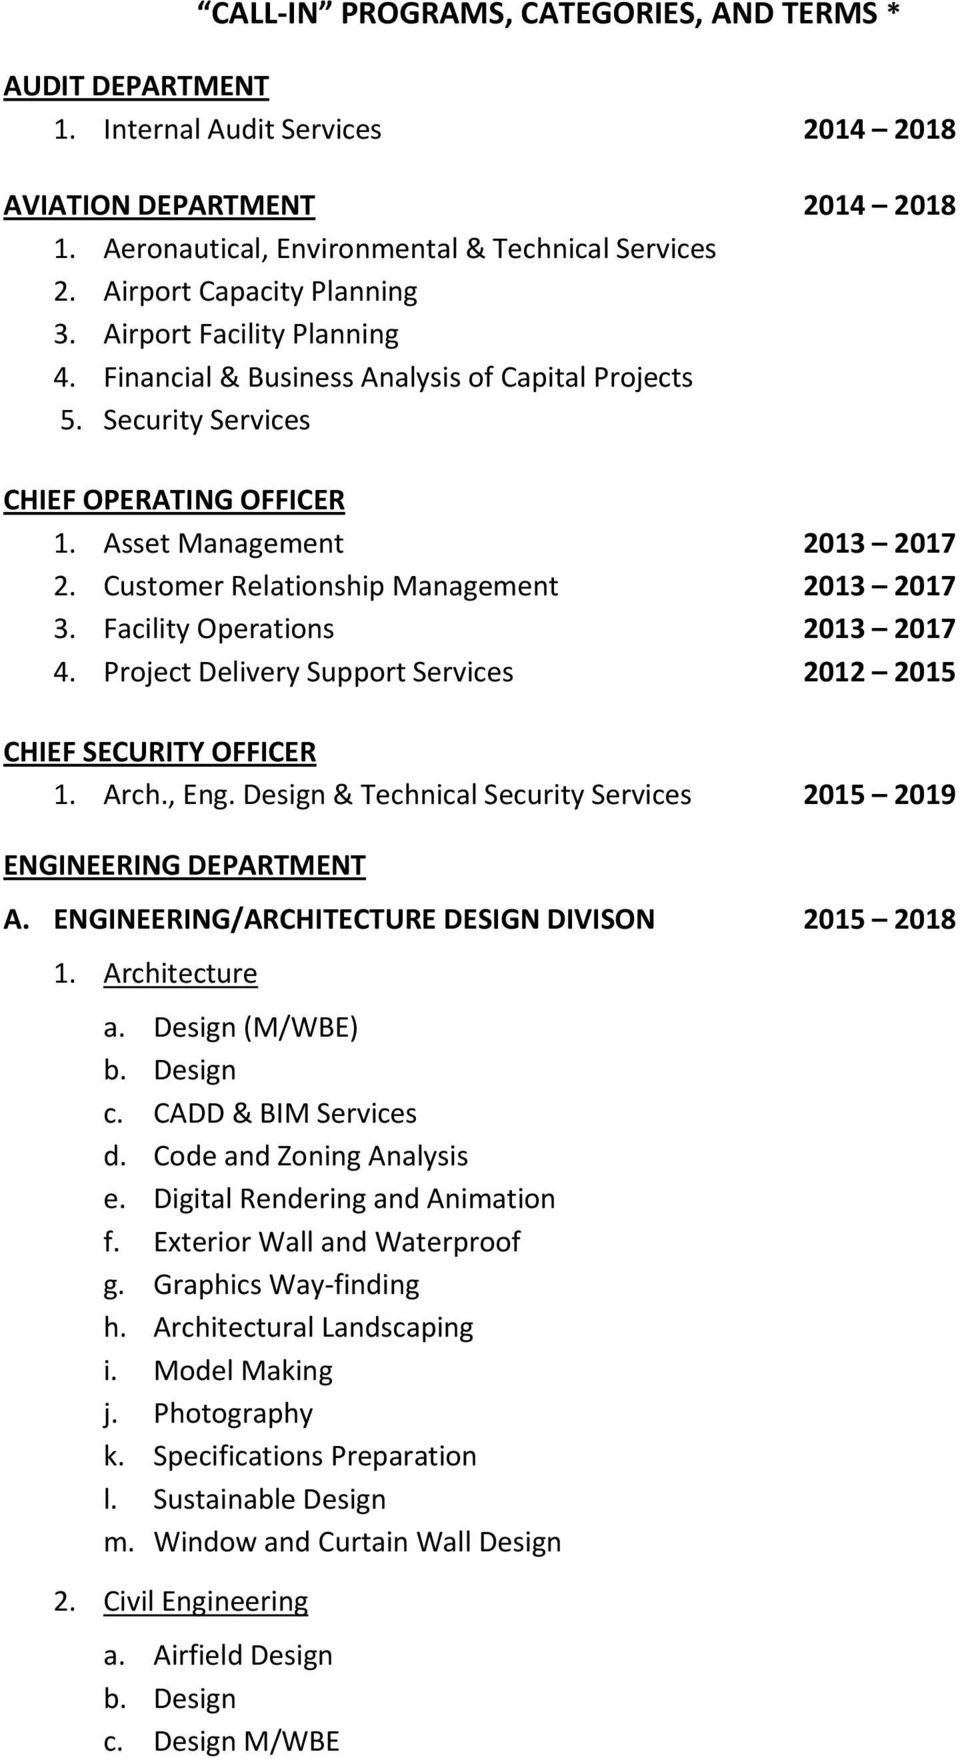 Customer Relationship Management 2013 2017 3. Facility Operations 2013 2017 4. Project Delivery Support Services 2012 2015 CHIEF SECURITY OFFICER 1. Arch., Eng.